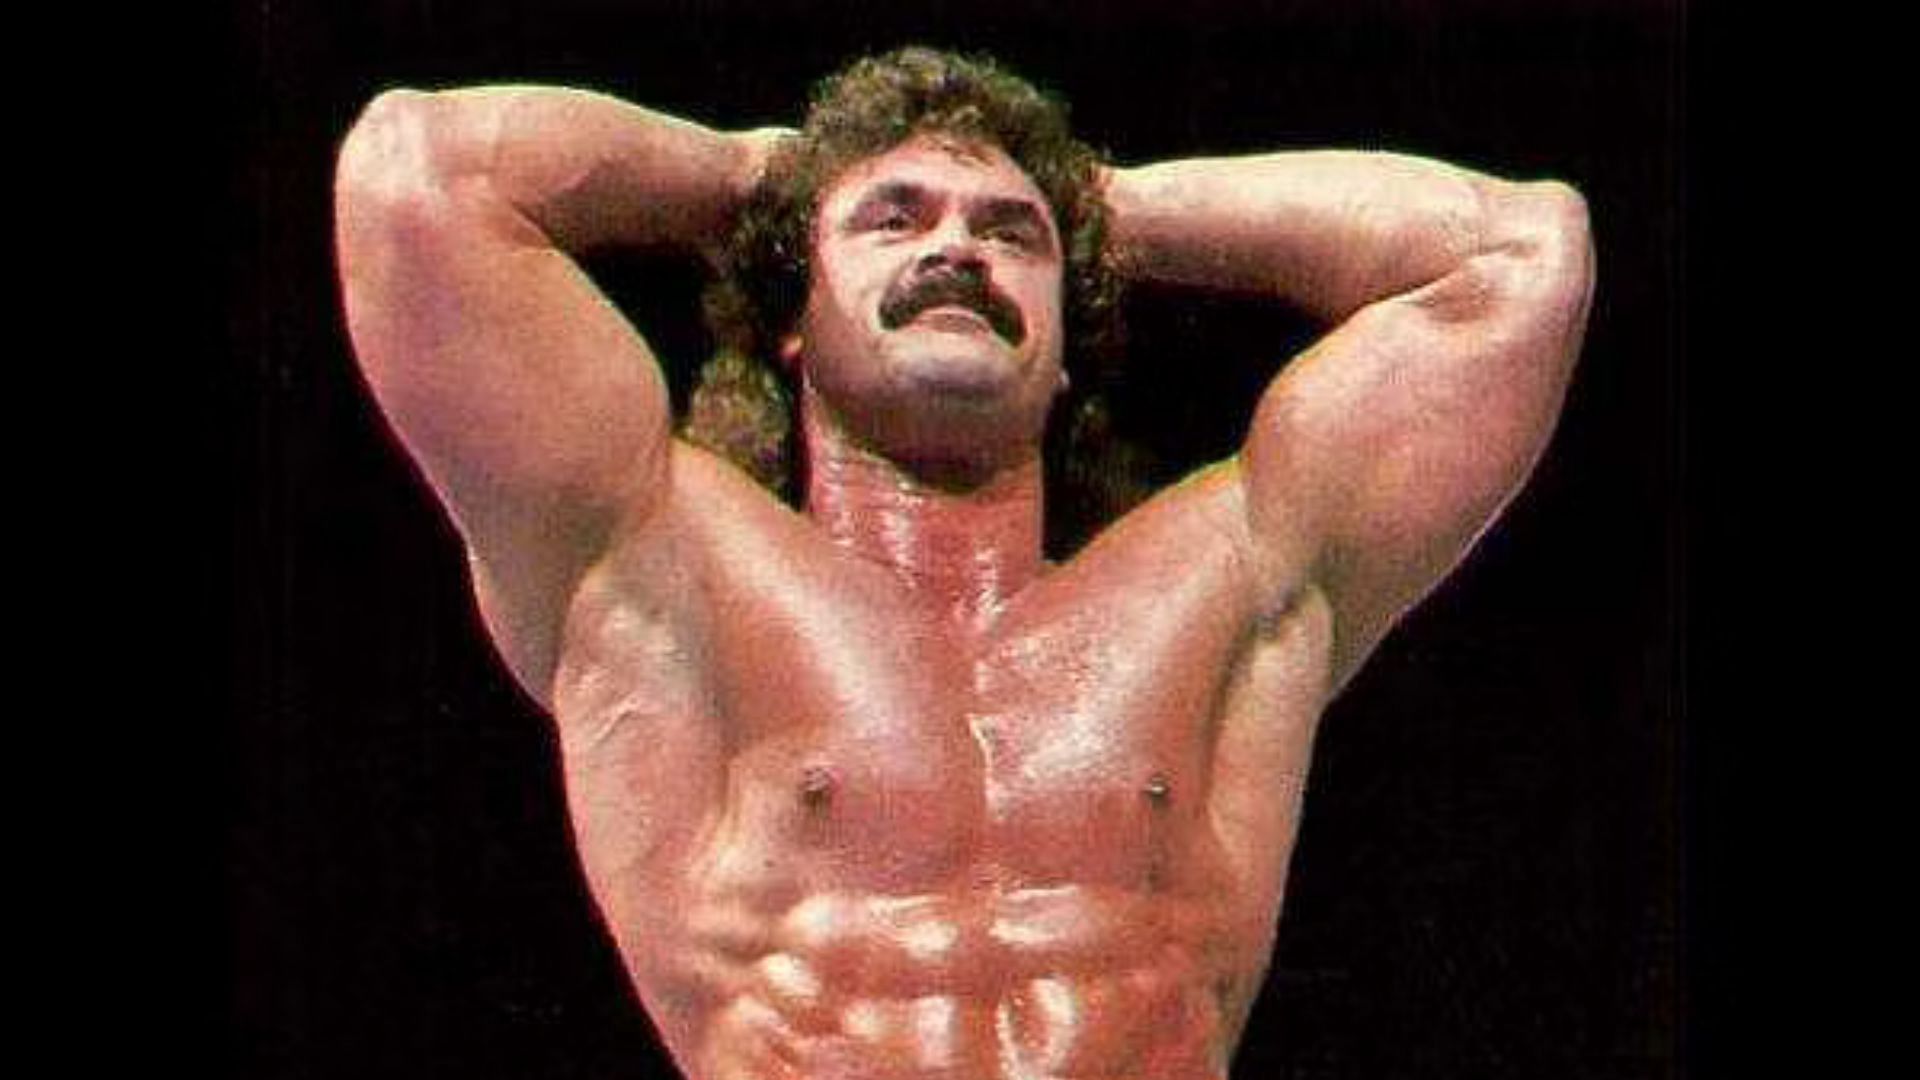 Rick Rude was one of the best heels in wrestling history